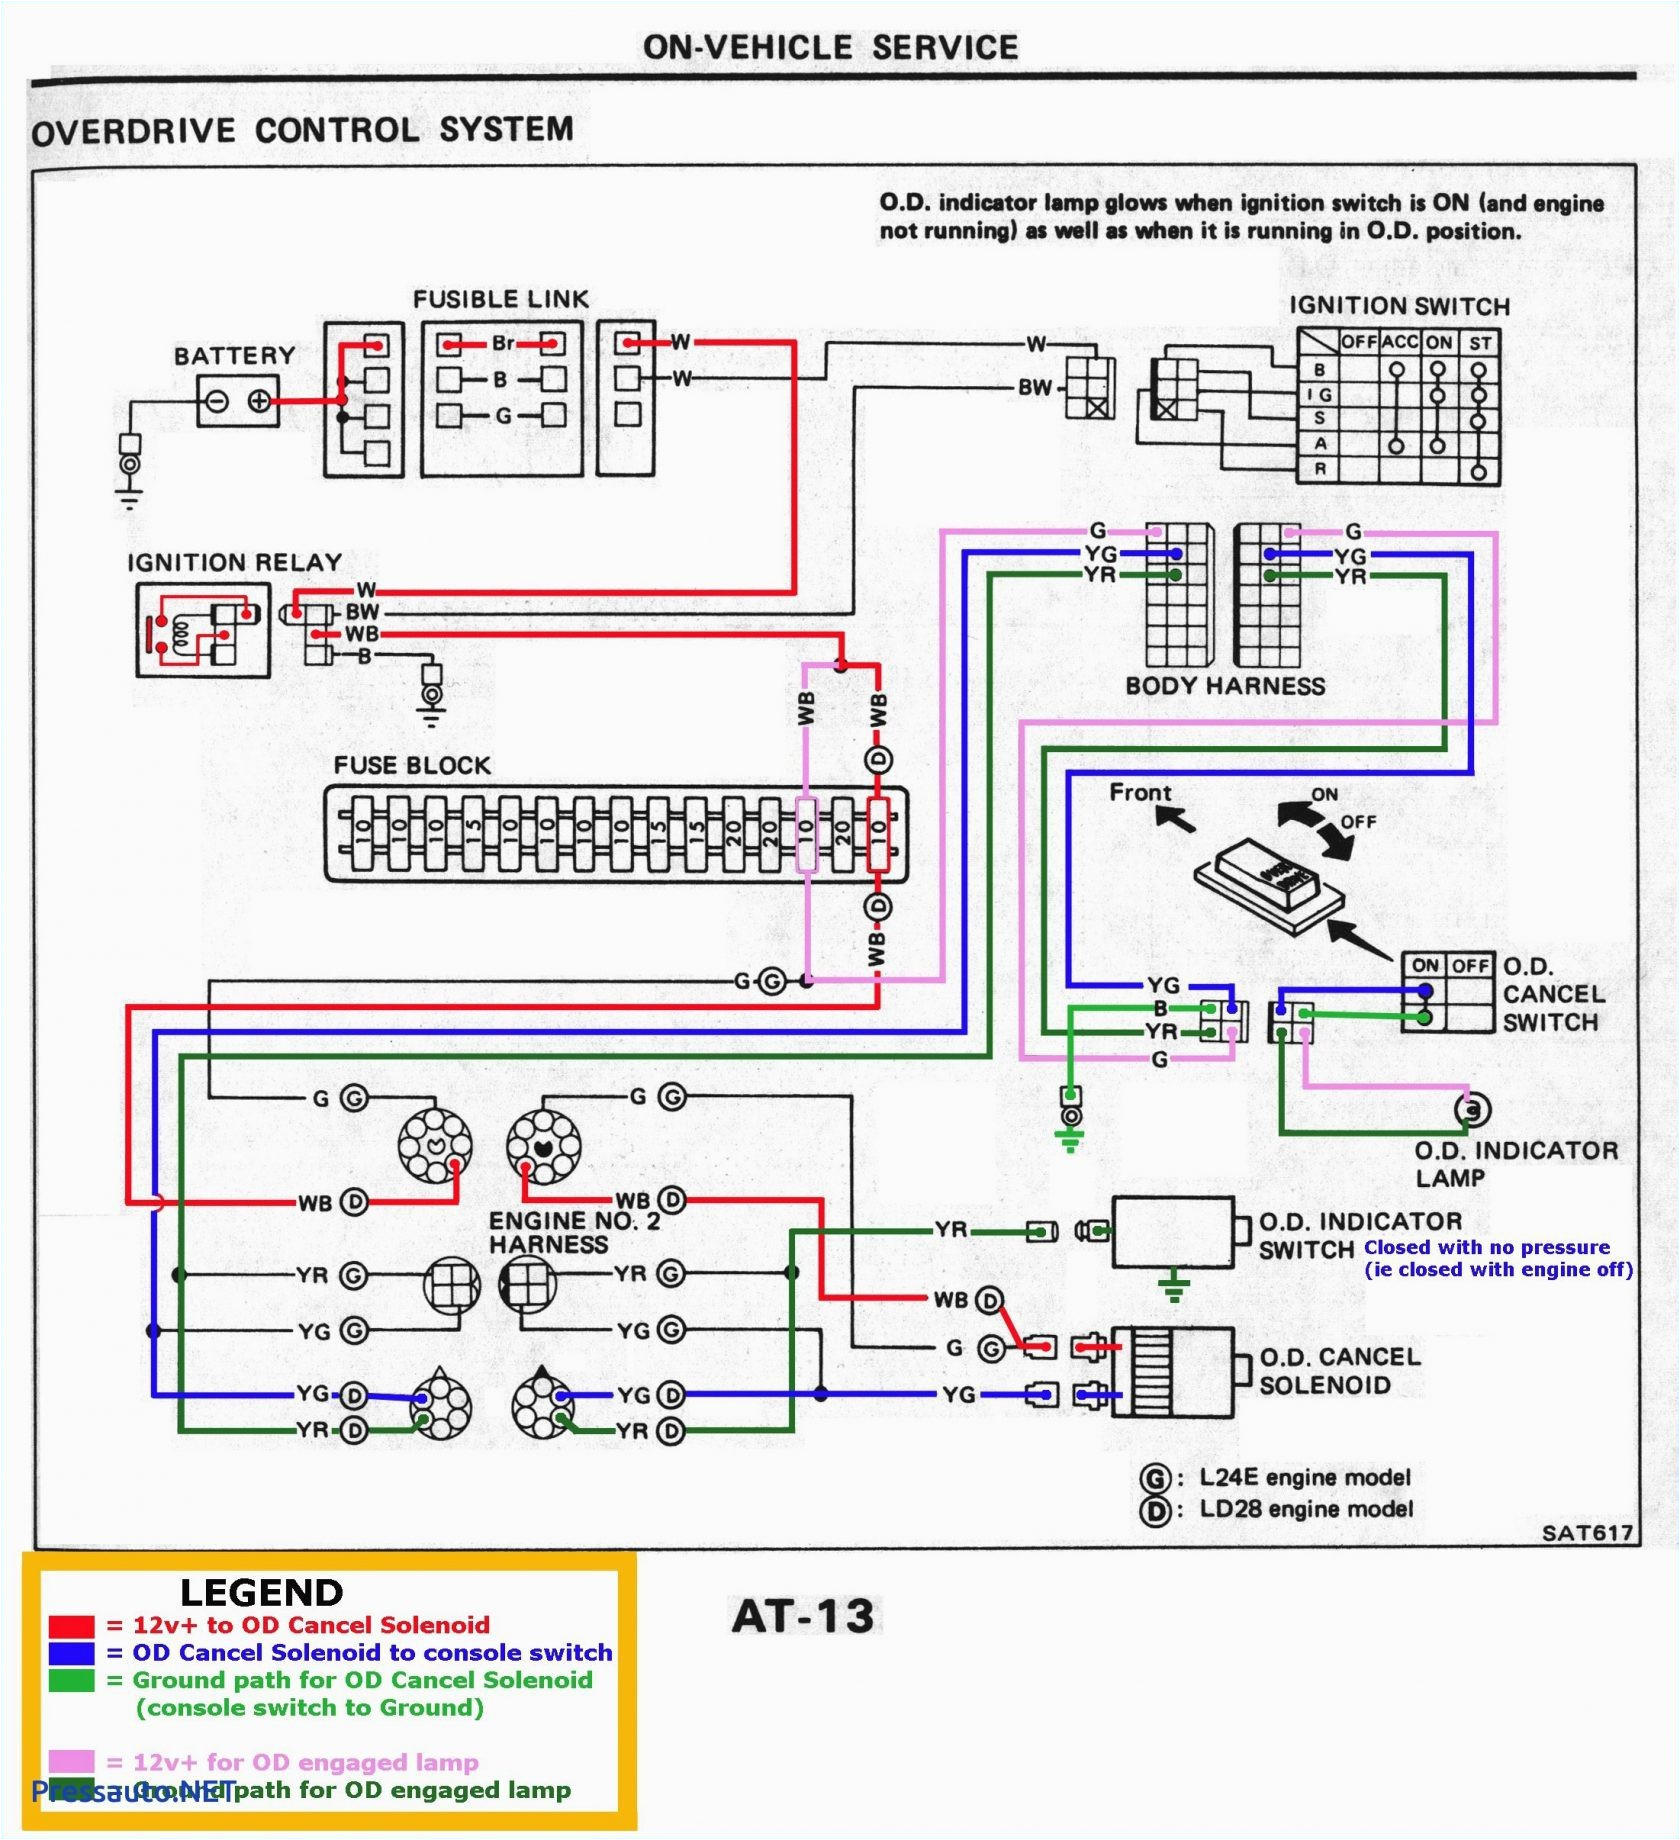 parker boats wiring diagrams my wiring diagram parker boat wiring diagram parker boats wiring diagrams